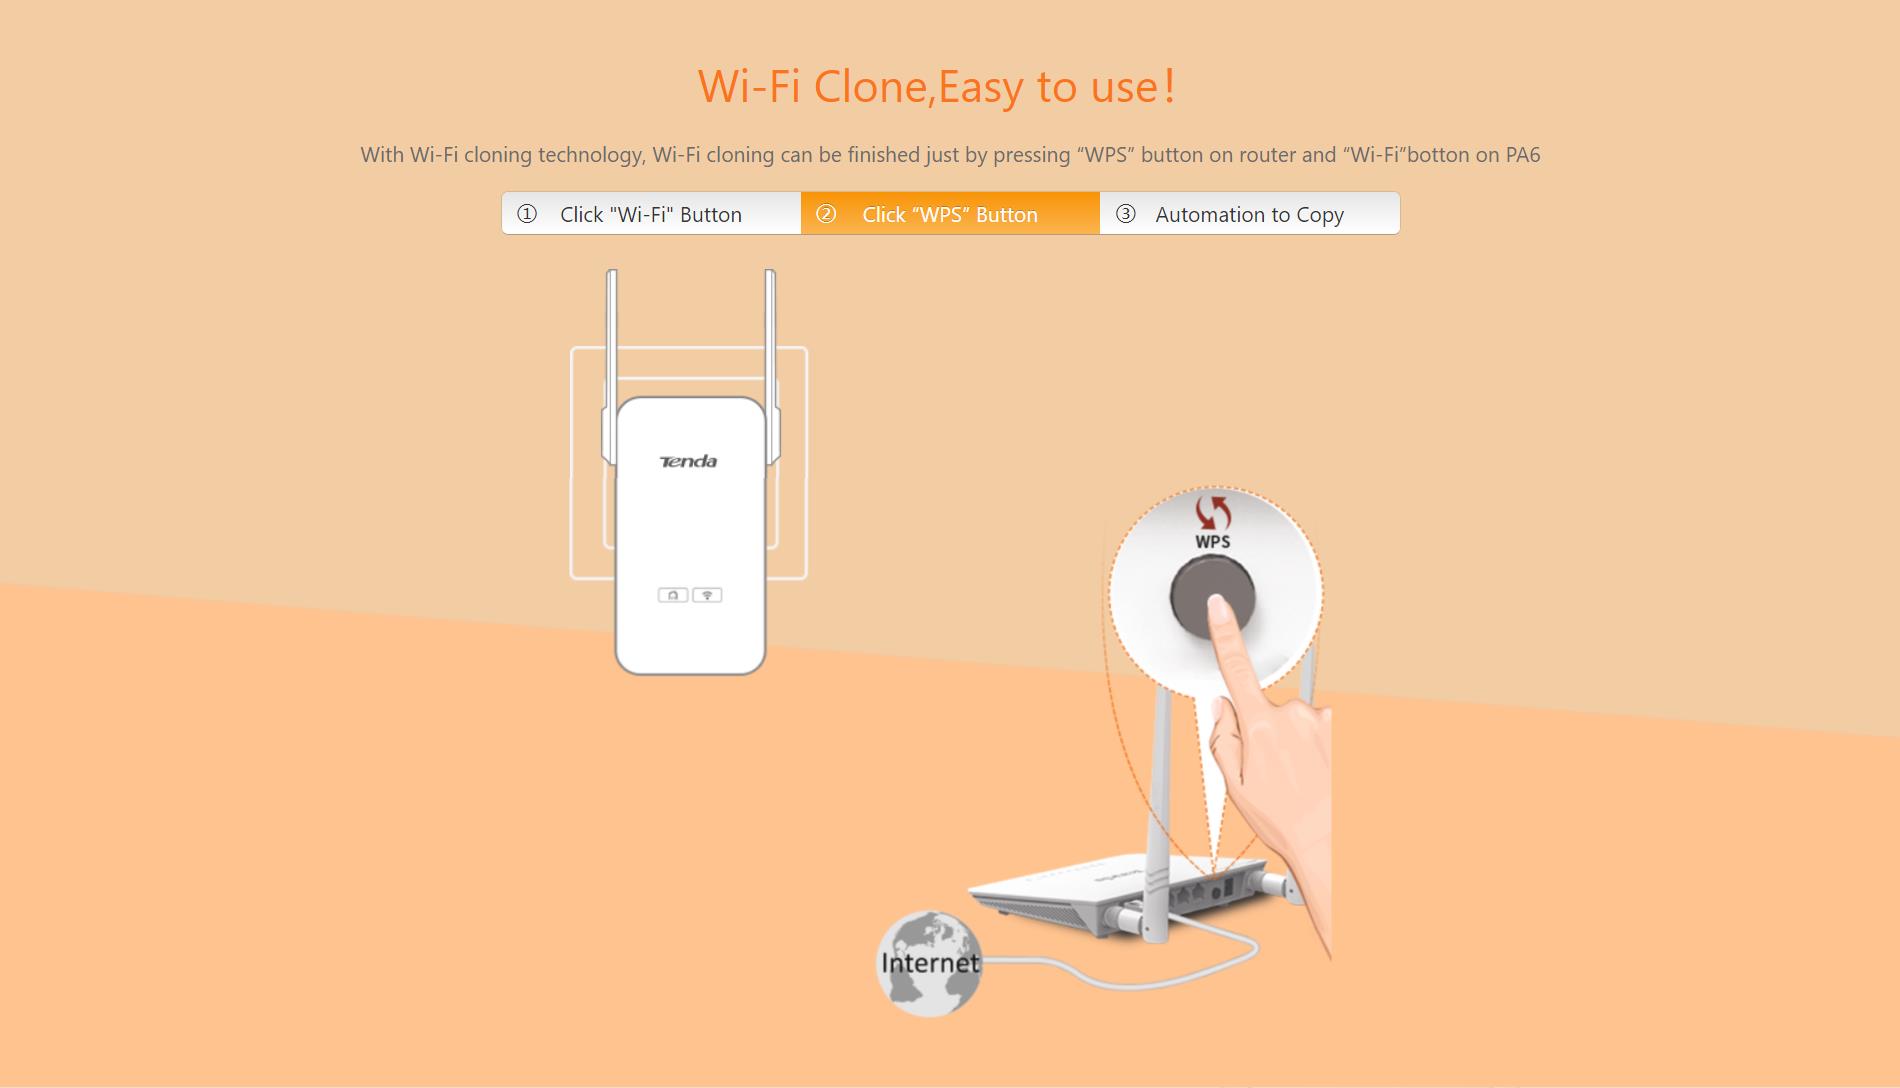 A large marketing image providing additional information about the product Tenda PH5 AV1000 Wi-Fi Powerline Extender Kit - Additional alt info not provided